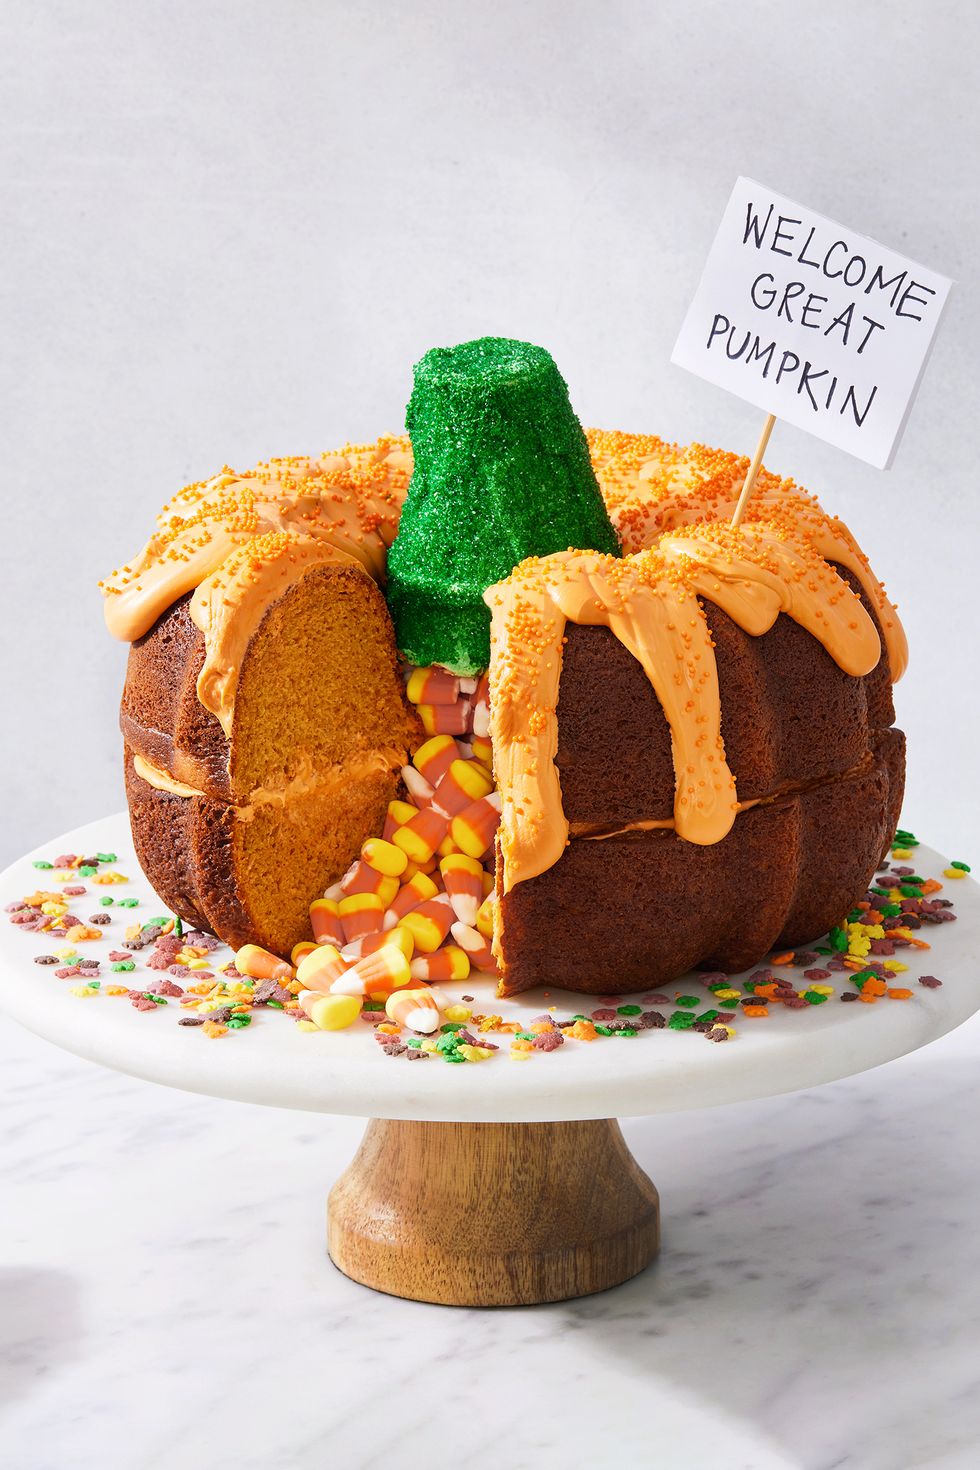 two pumpkin bundt cakes stacked on each other, filled with candy corn, and decorated to look like a pumpkin